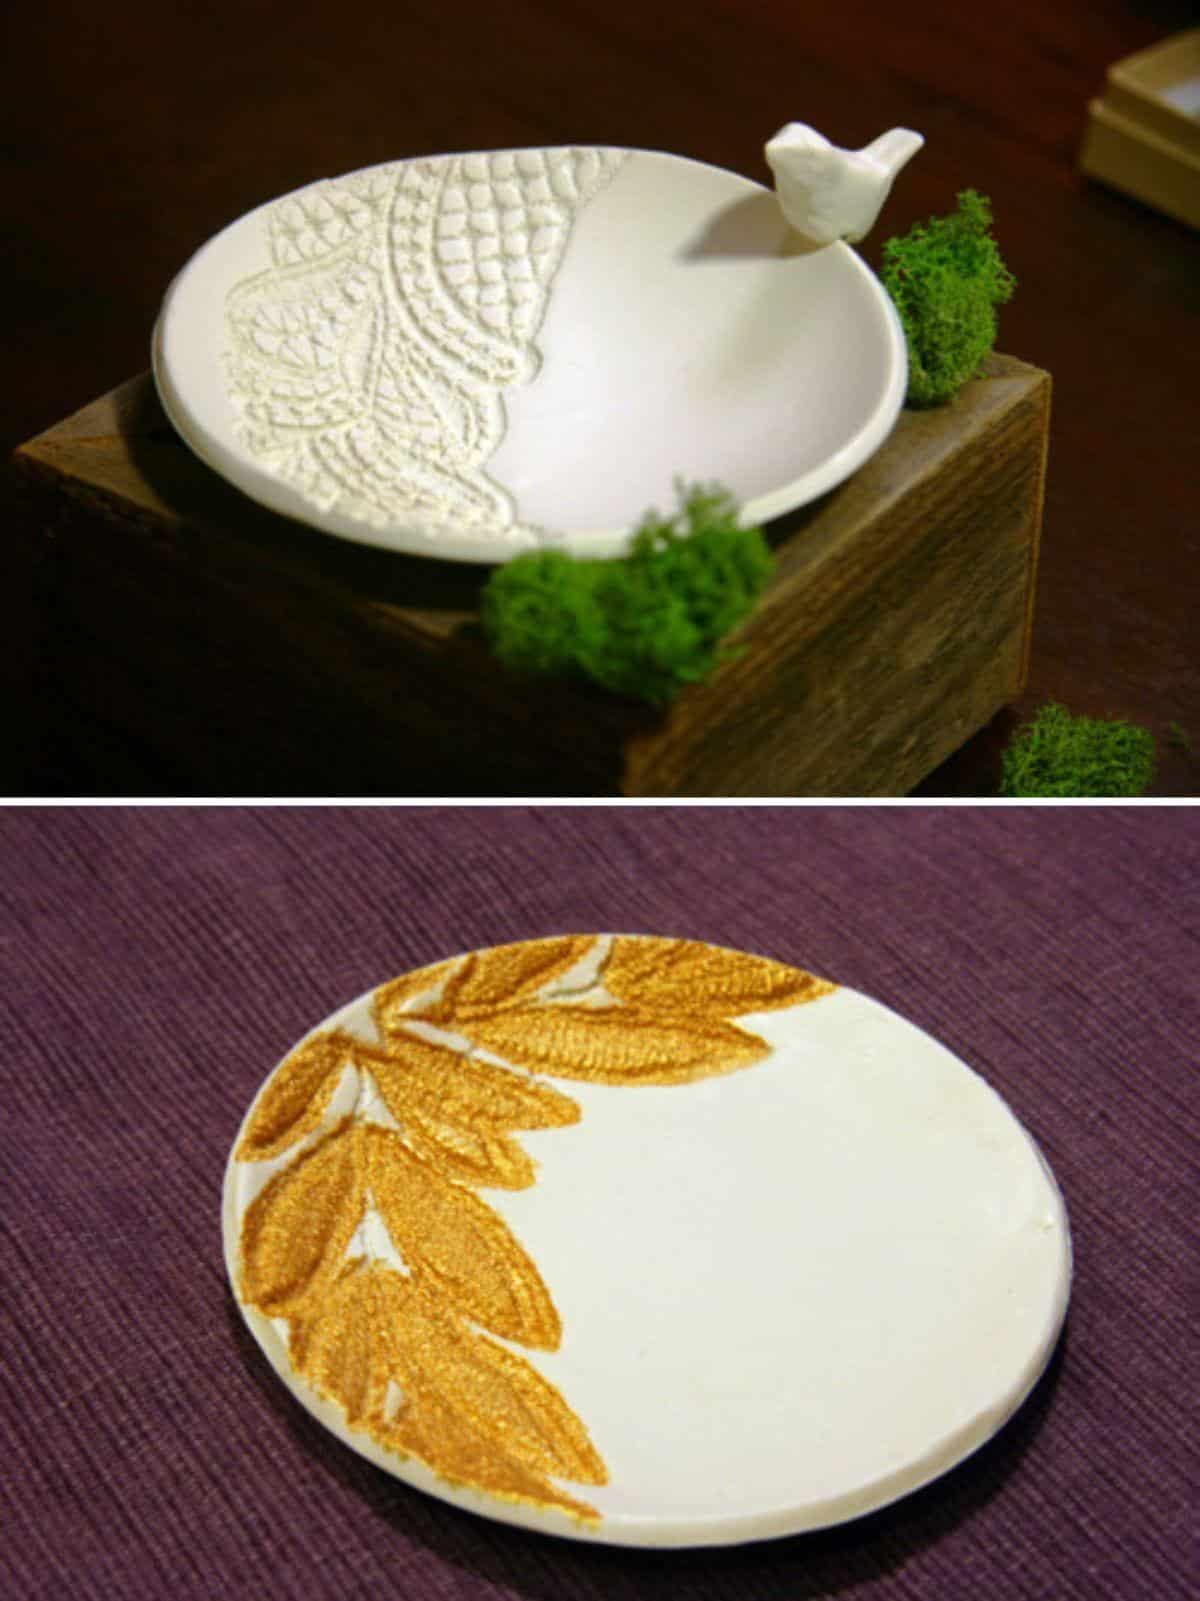 Anthro inspired lace embossed dish